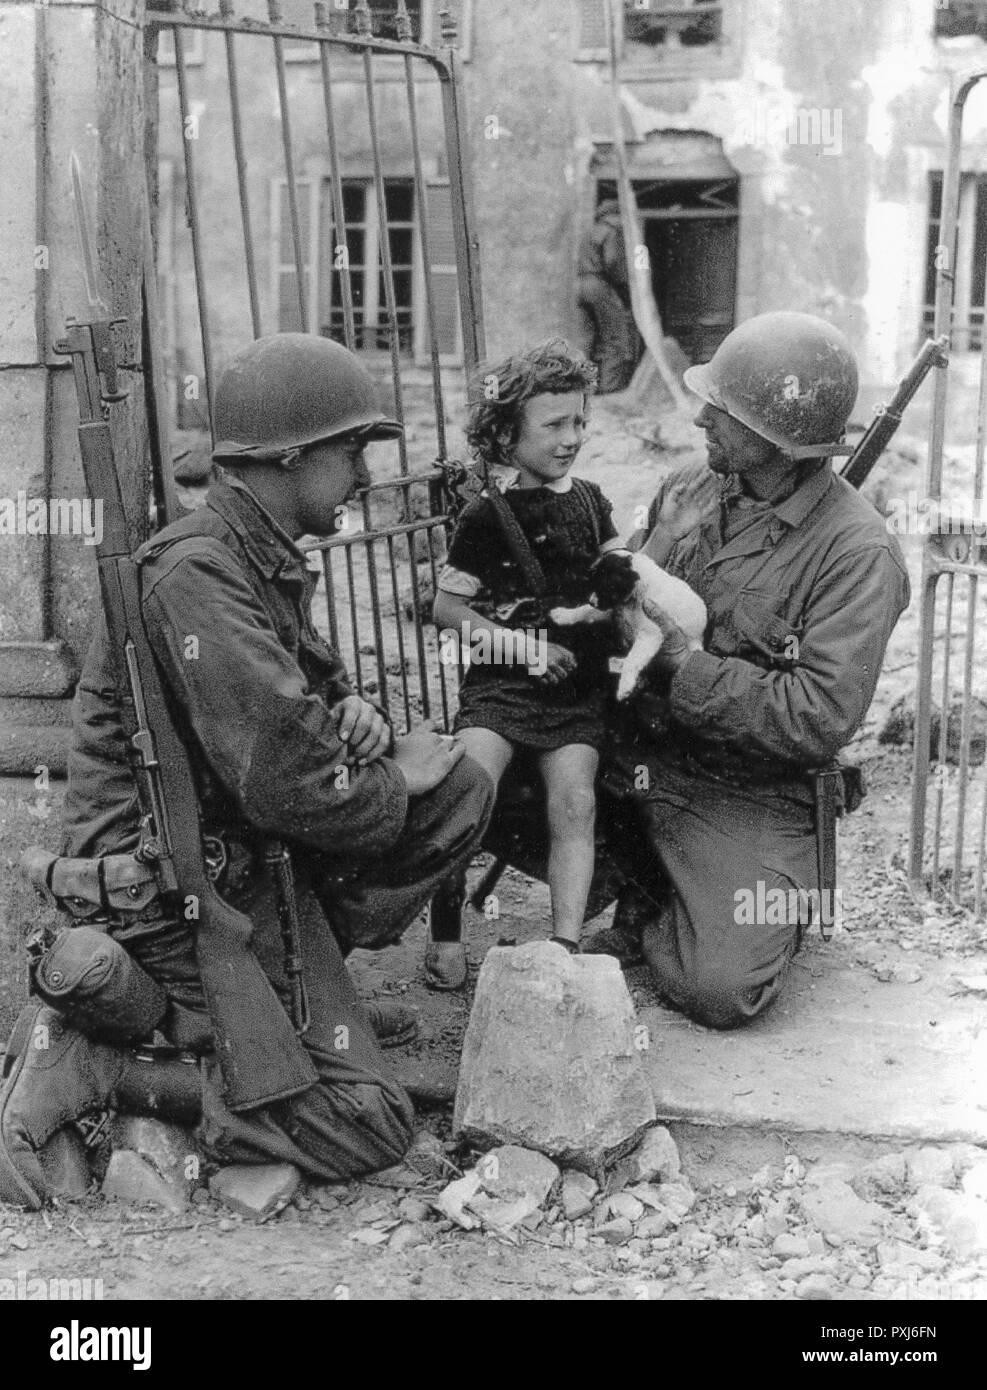 WW2 - US Troops comfort a distressed child and puppy - likely in France following the D-Day landings of June 1944.     Date: 1944 Stock Photo